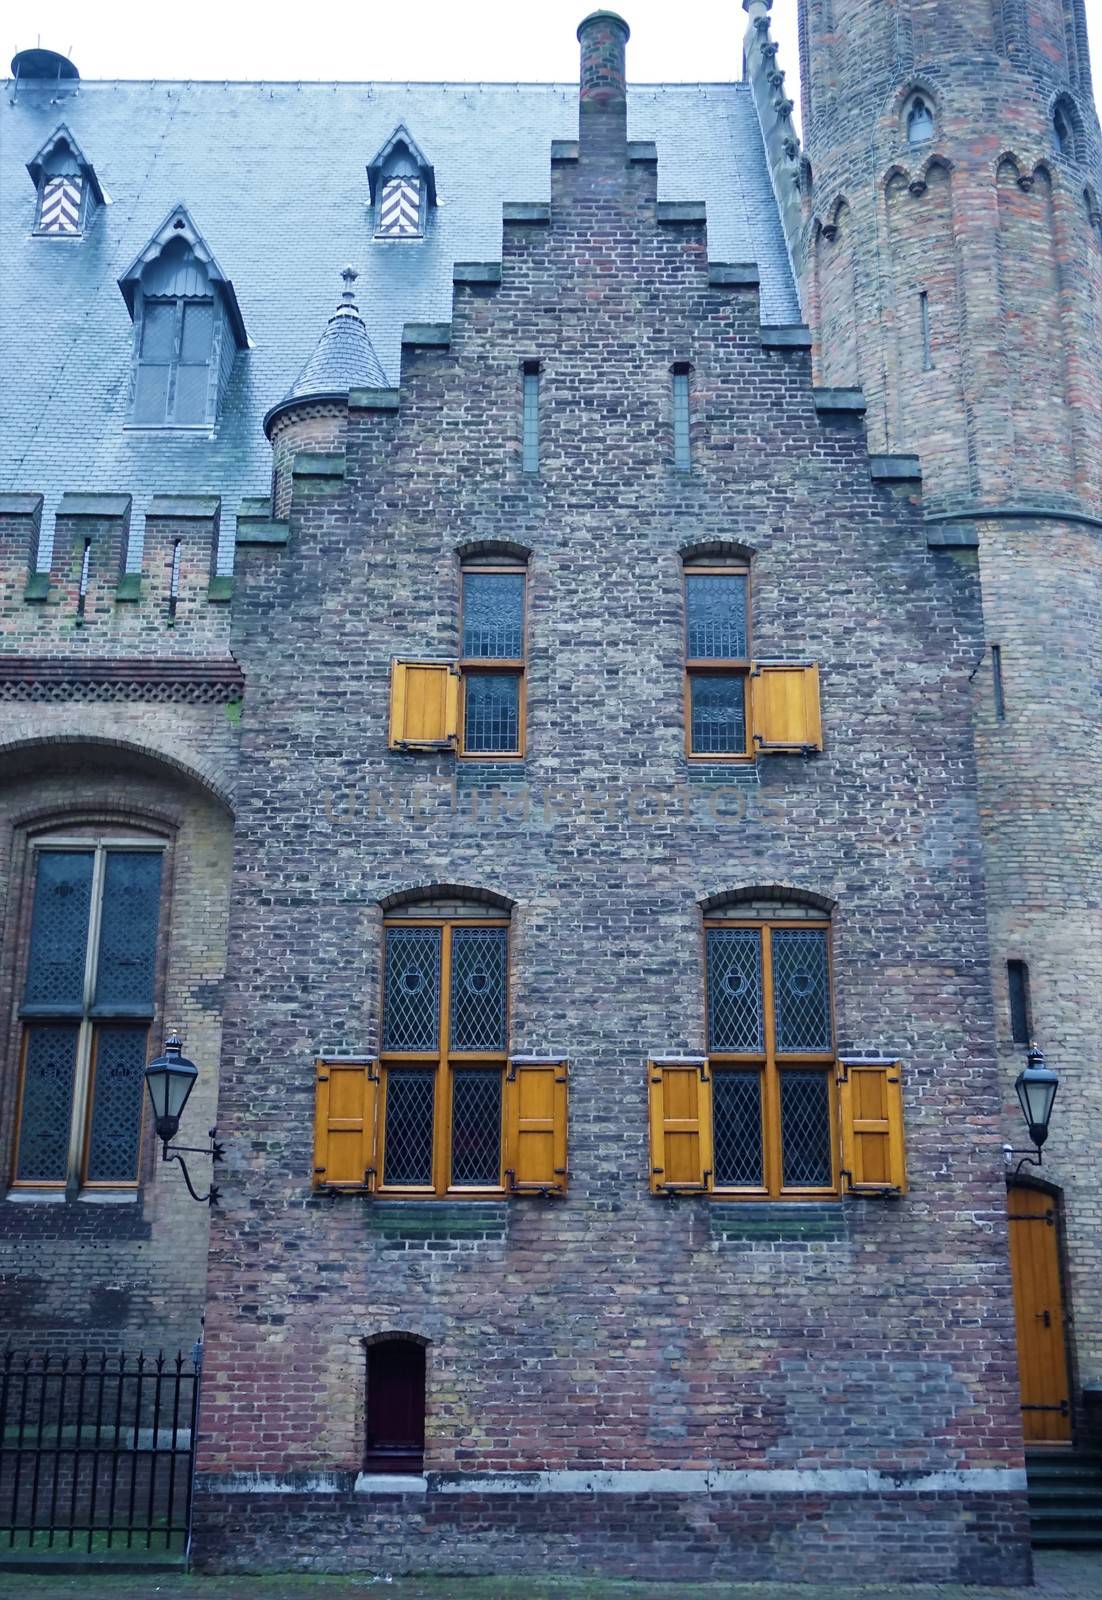 Old brick house in the inner court of The Hague